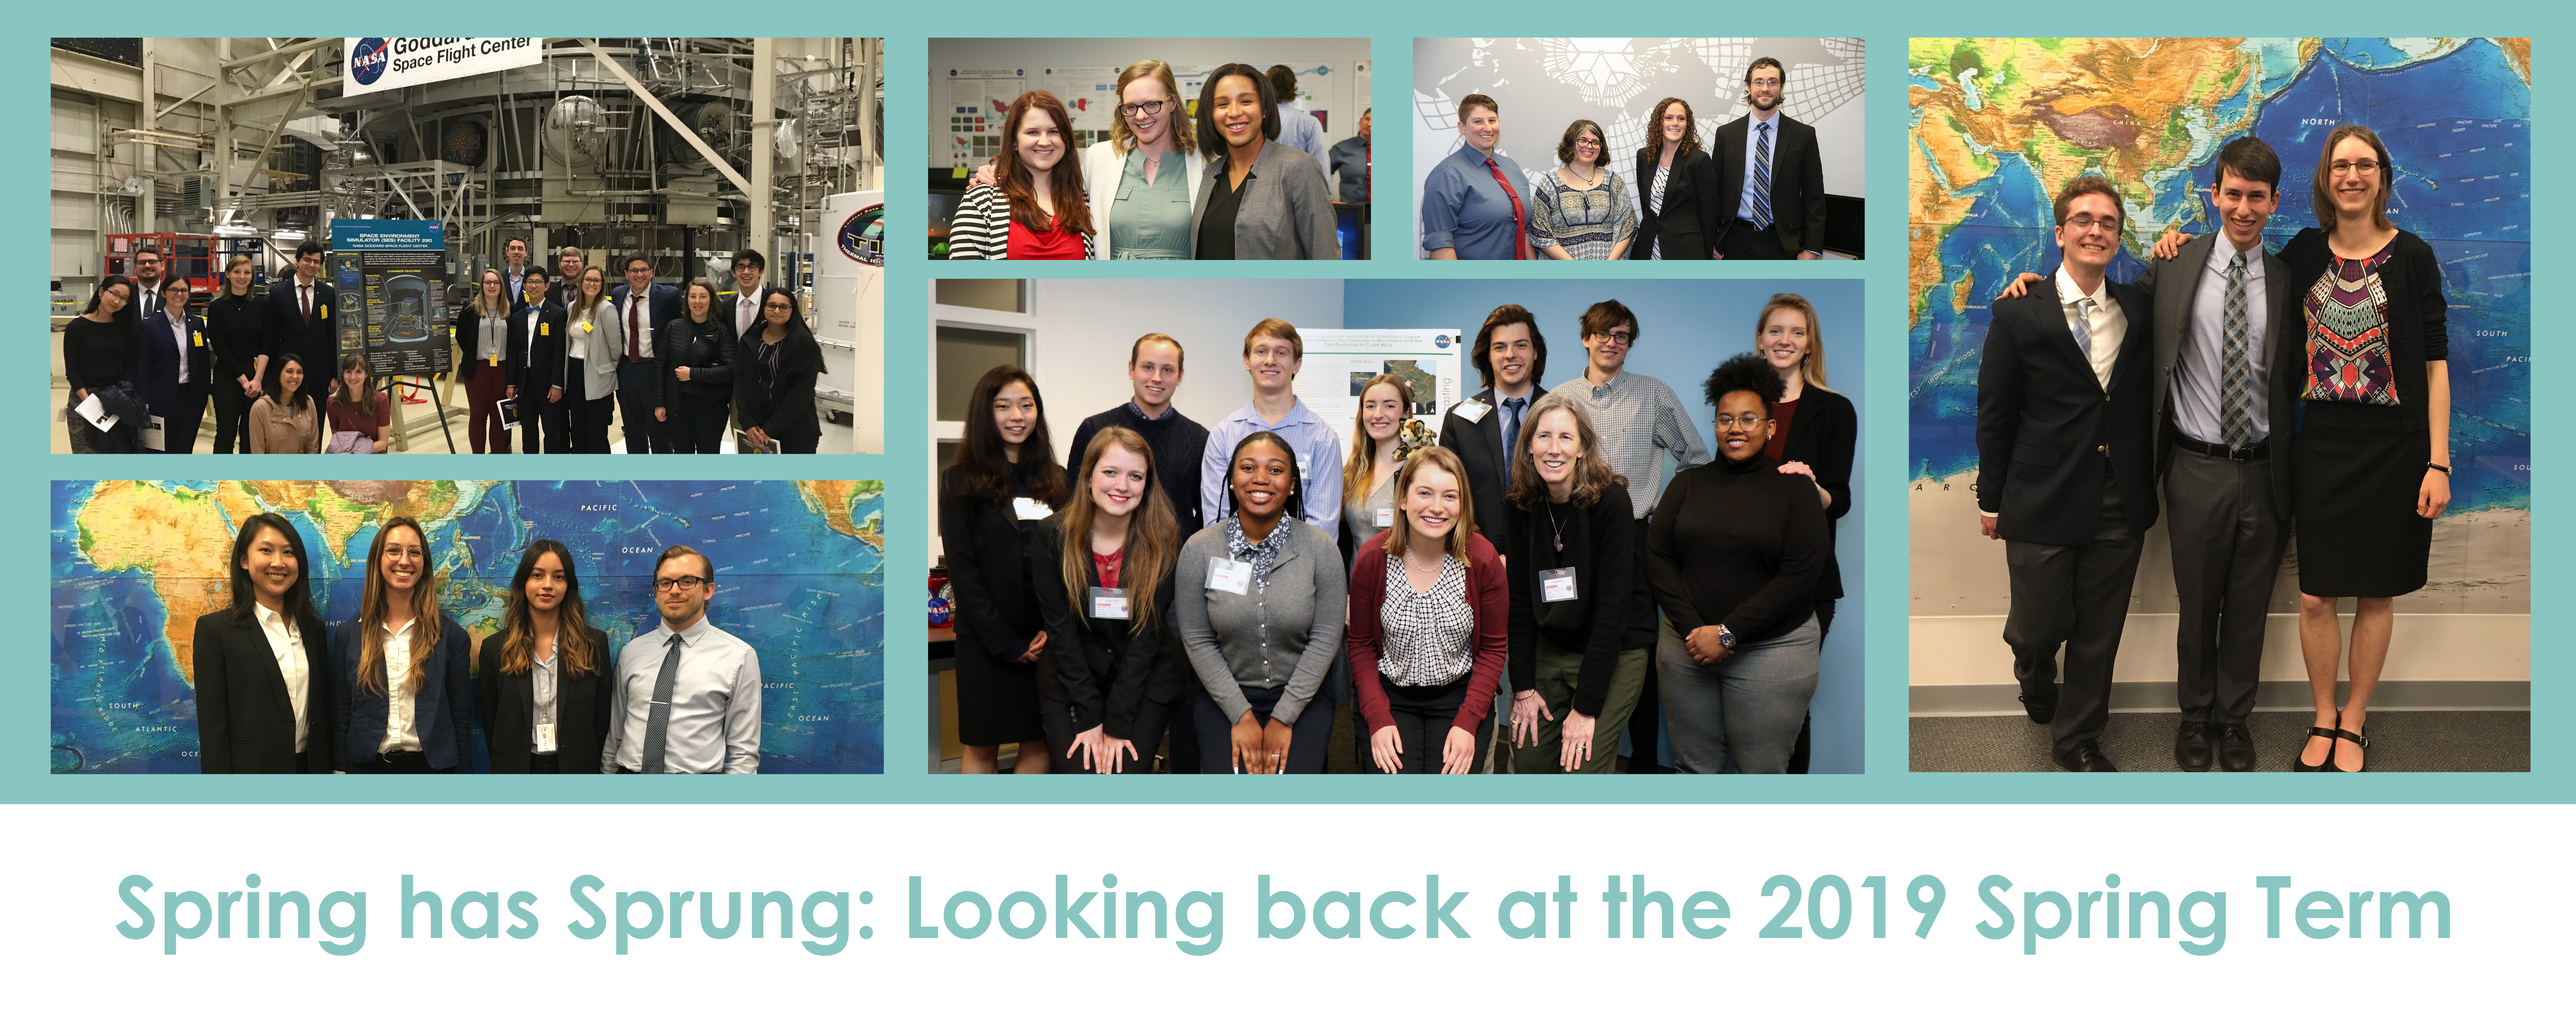 Spring has Sprung: Looking Back at the 2019 Spring Term